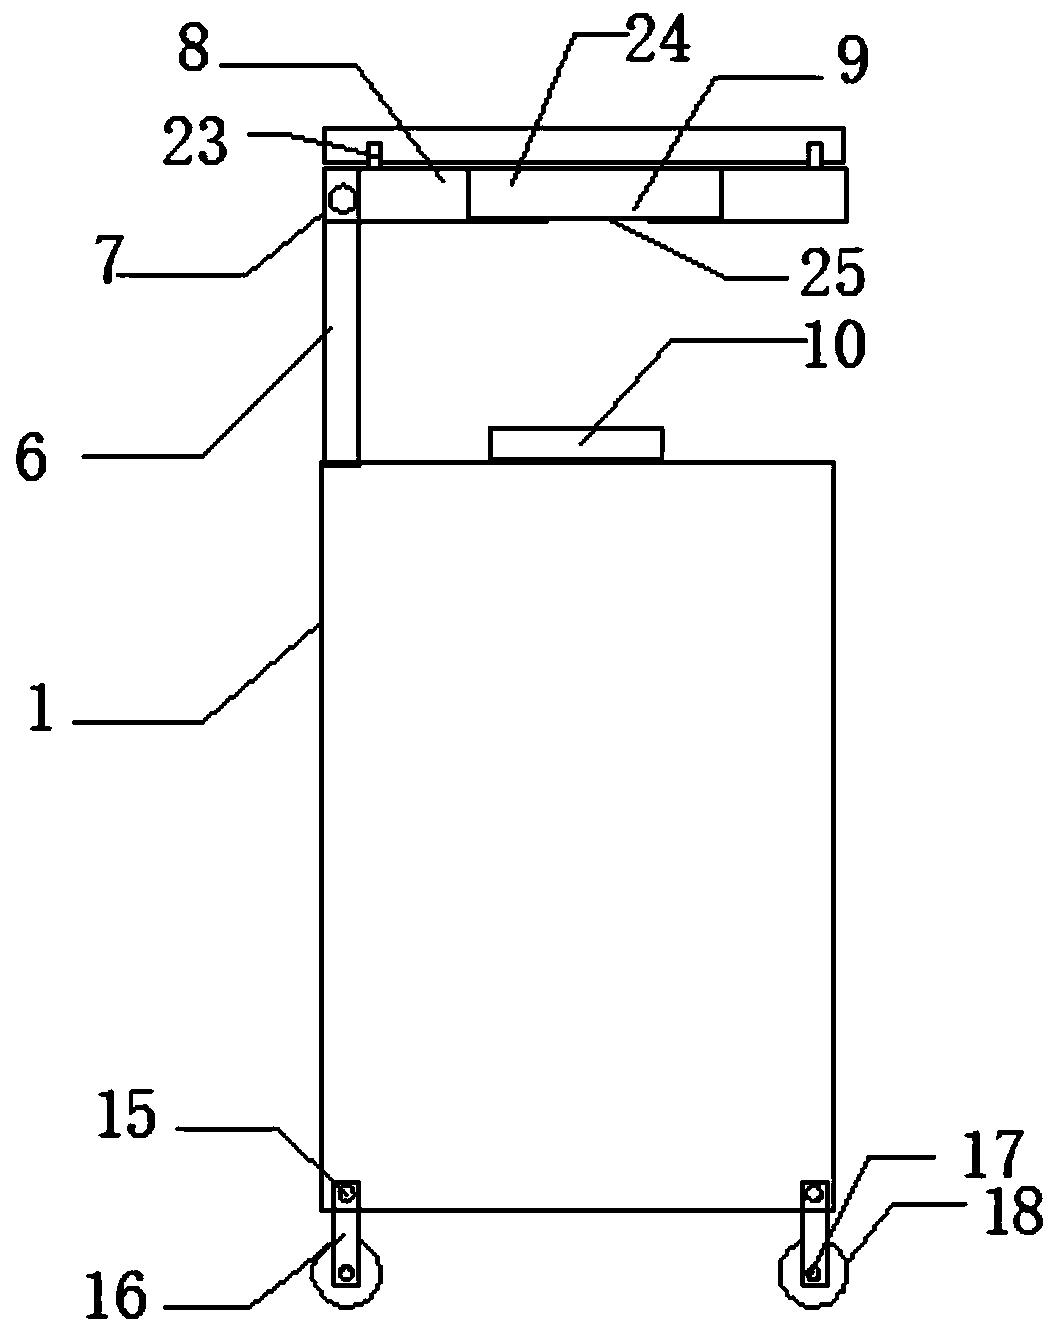 An optimized multifunctional home audio bracket device